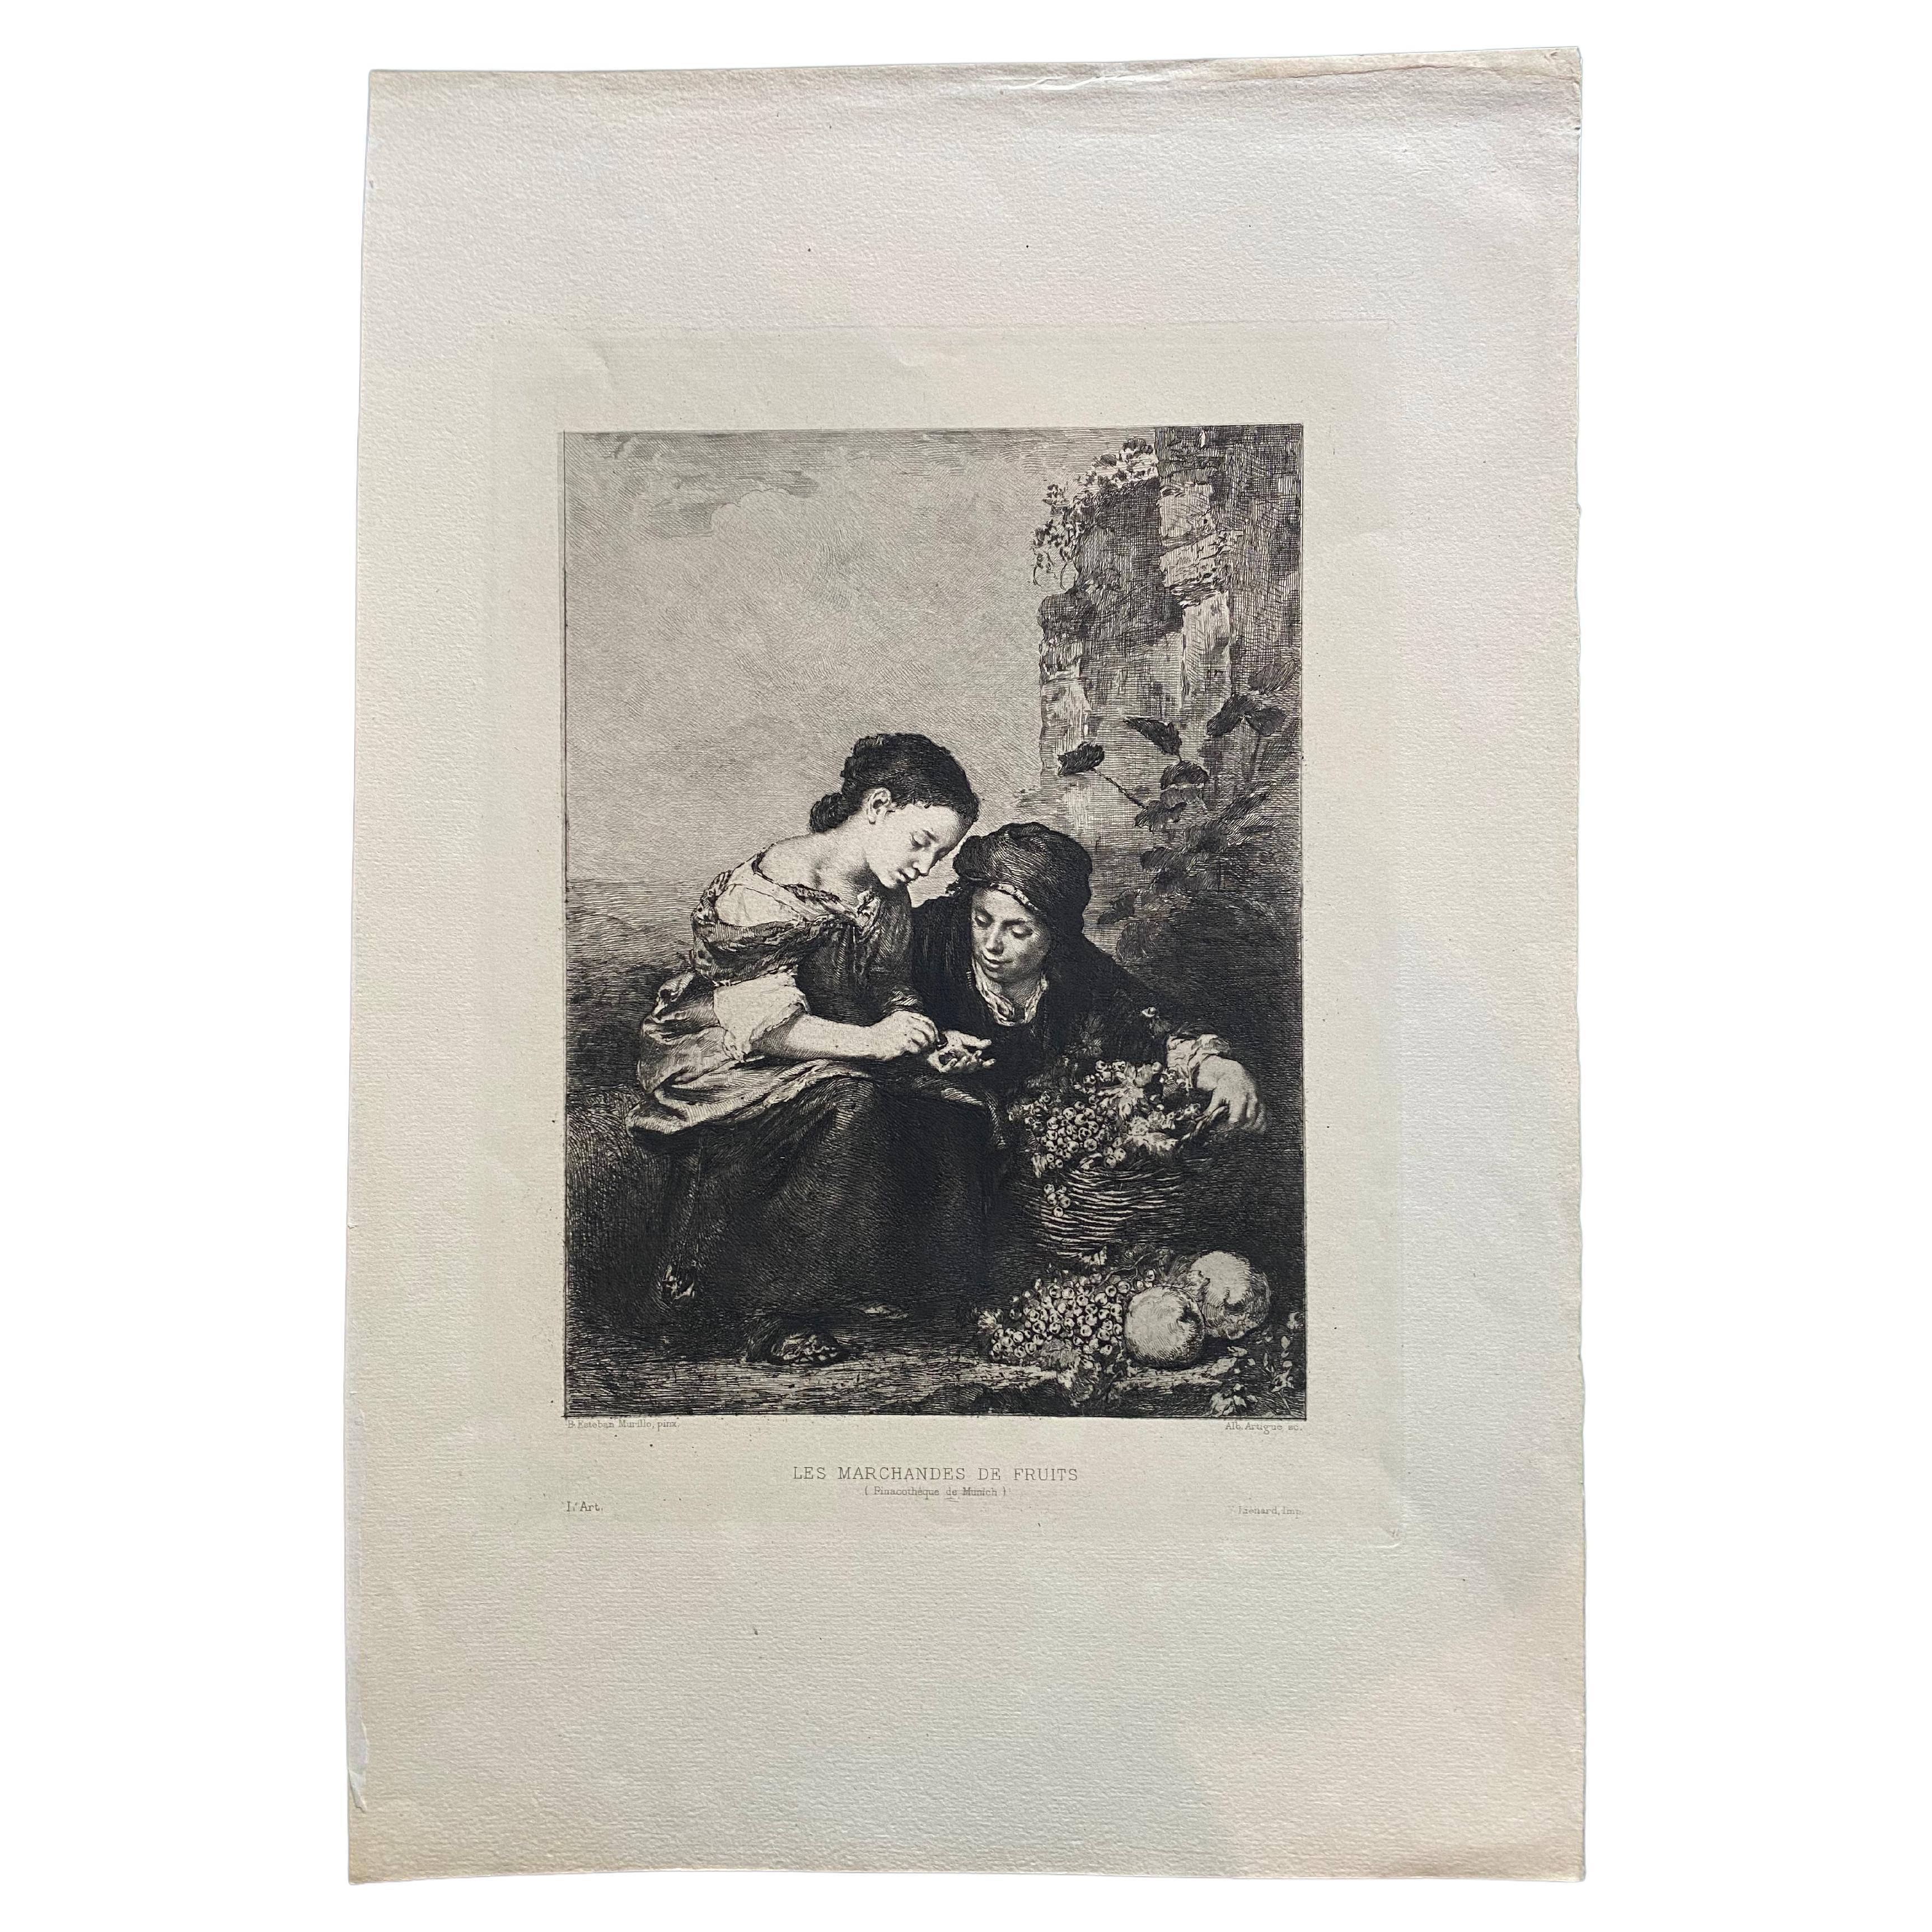 This etching by Albert Artigue after the oil on canvas by Esteban Murillo. Published in the french art magazine « L' Art » ( 1875-1907) in 1880. Engraved in the 19 century by the French artist Albert Artigue. He is known for his engravings,